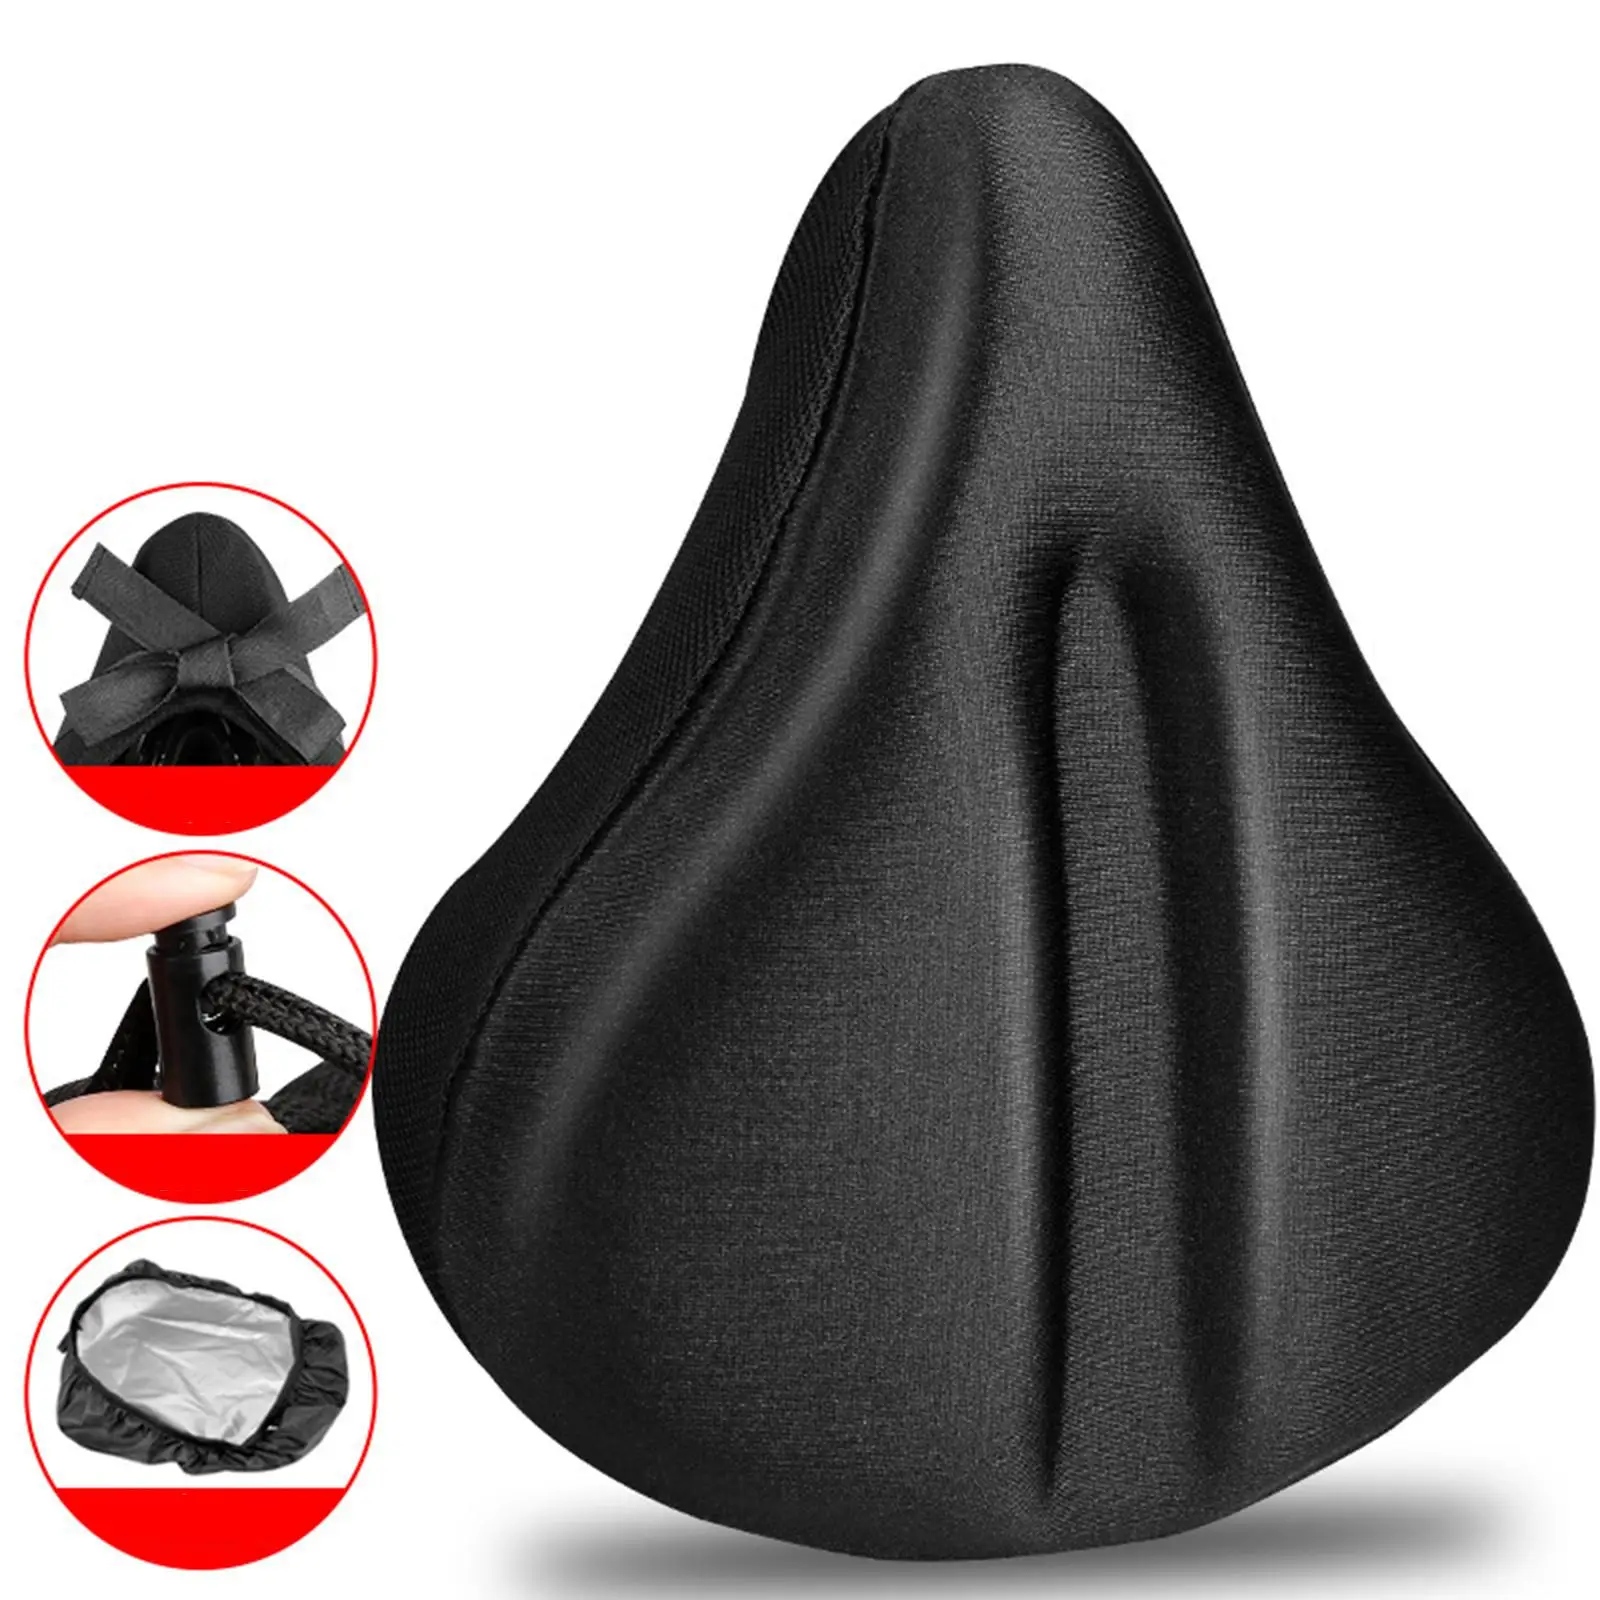 Bike Seat Cover Soft Comfortable Bicycle Saddle Cover for Exercise Bike Road Bike Folding Bike Outdoor Cycling Riding